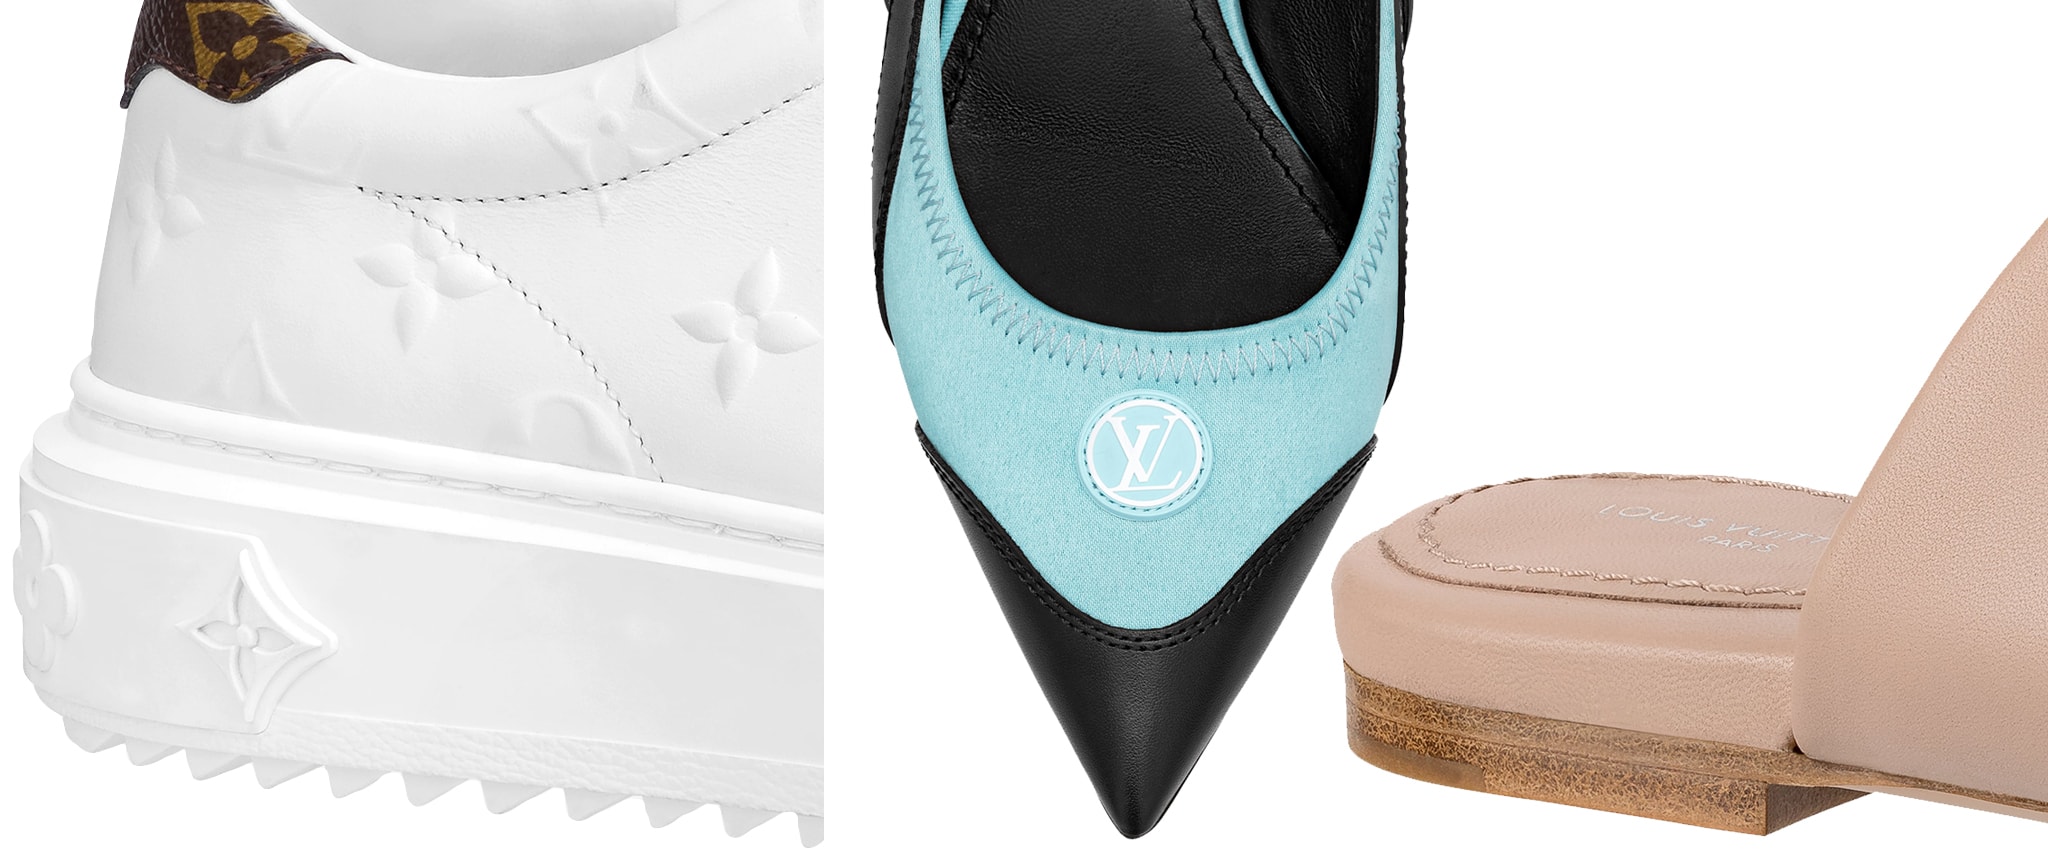 How to spot fake Louis Vuitton shoes - Quora